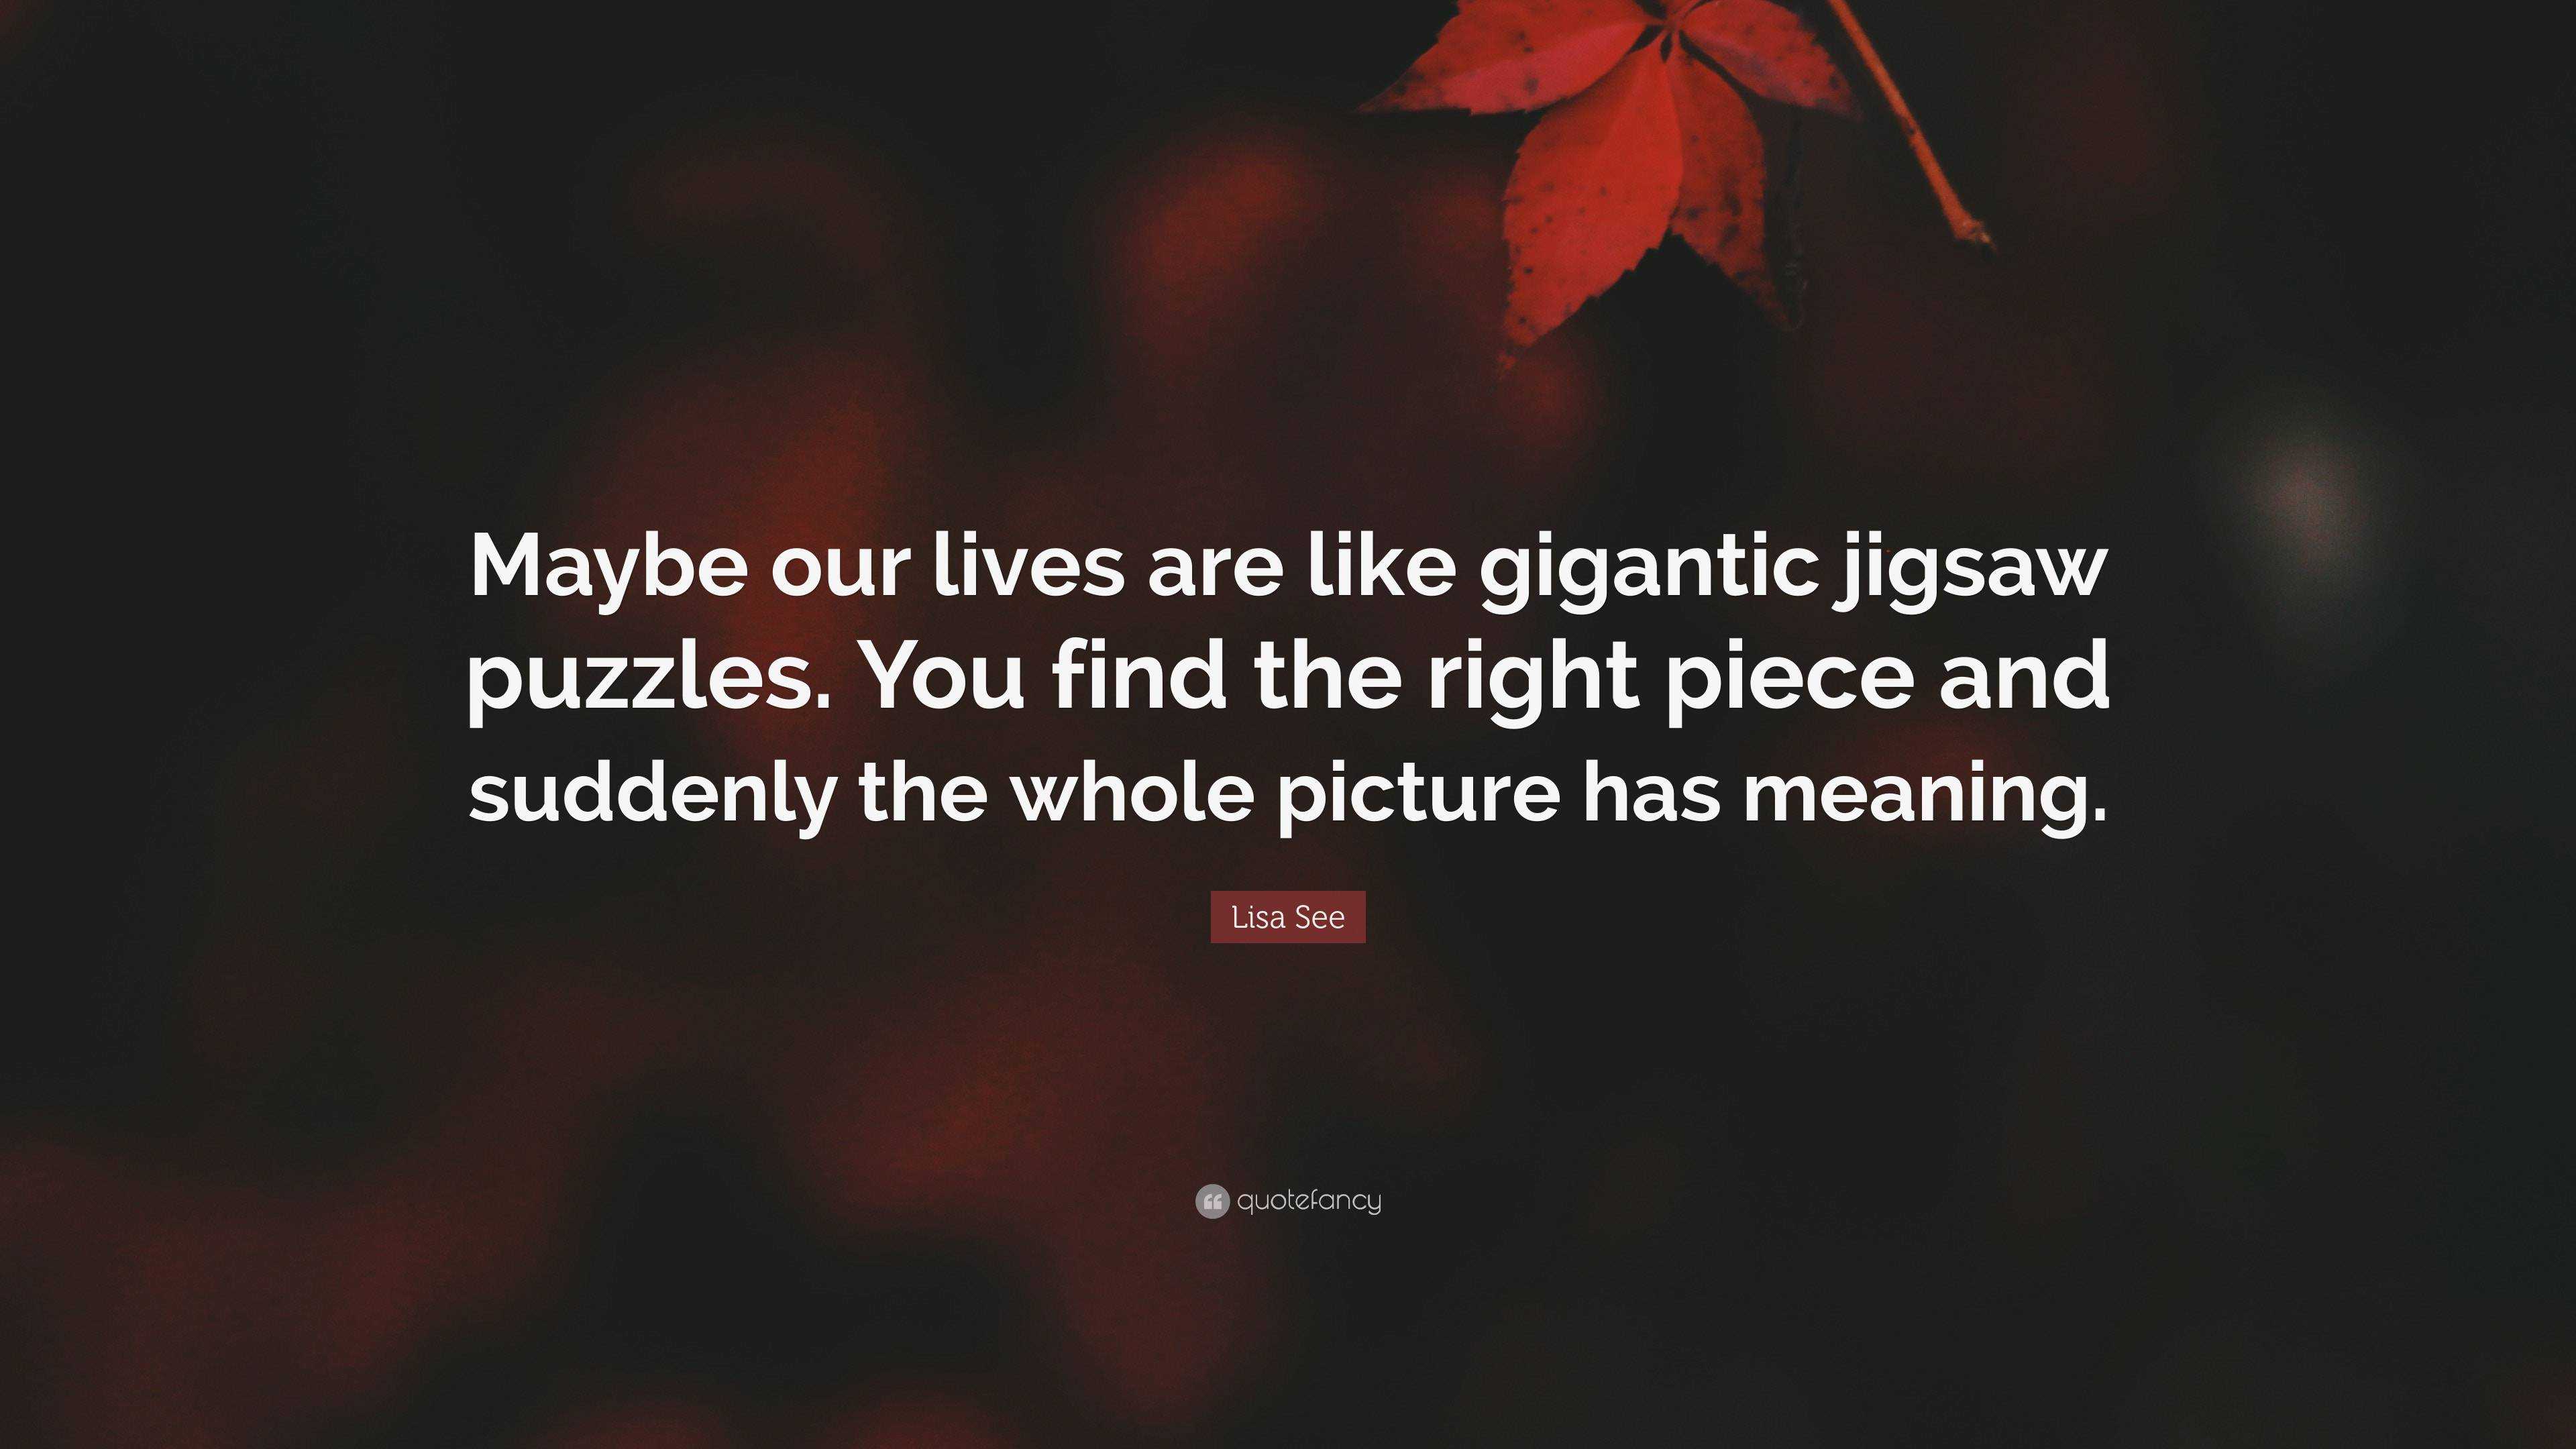 Jigsaw Puzzle Games - Discover the Bigger Picture 